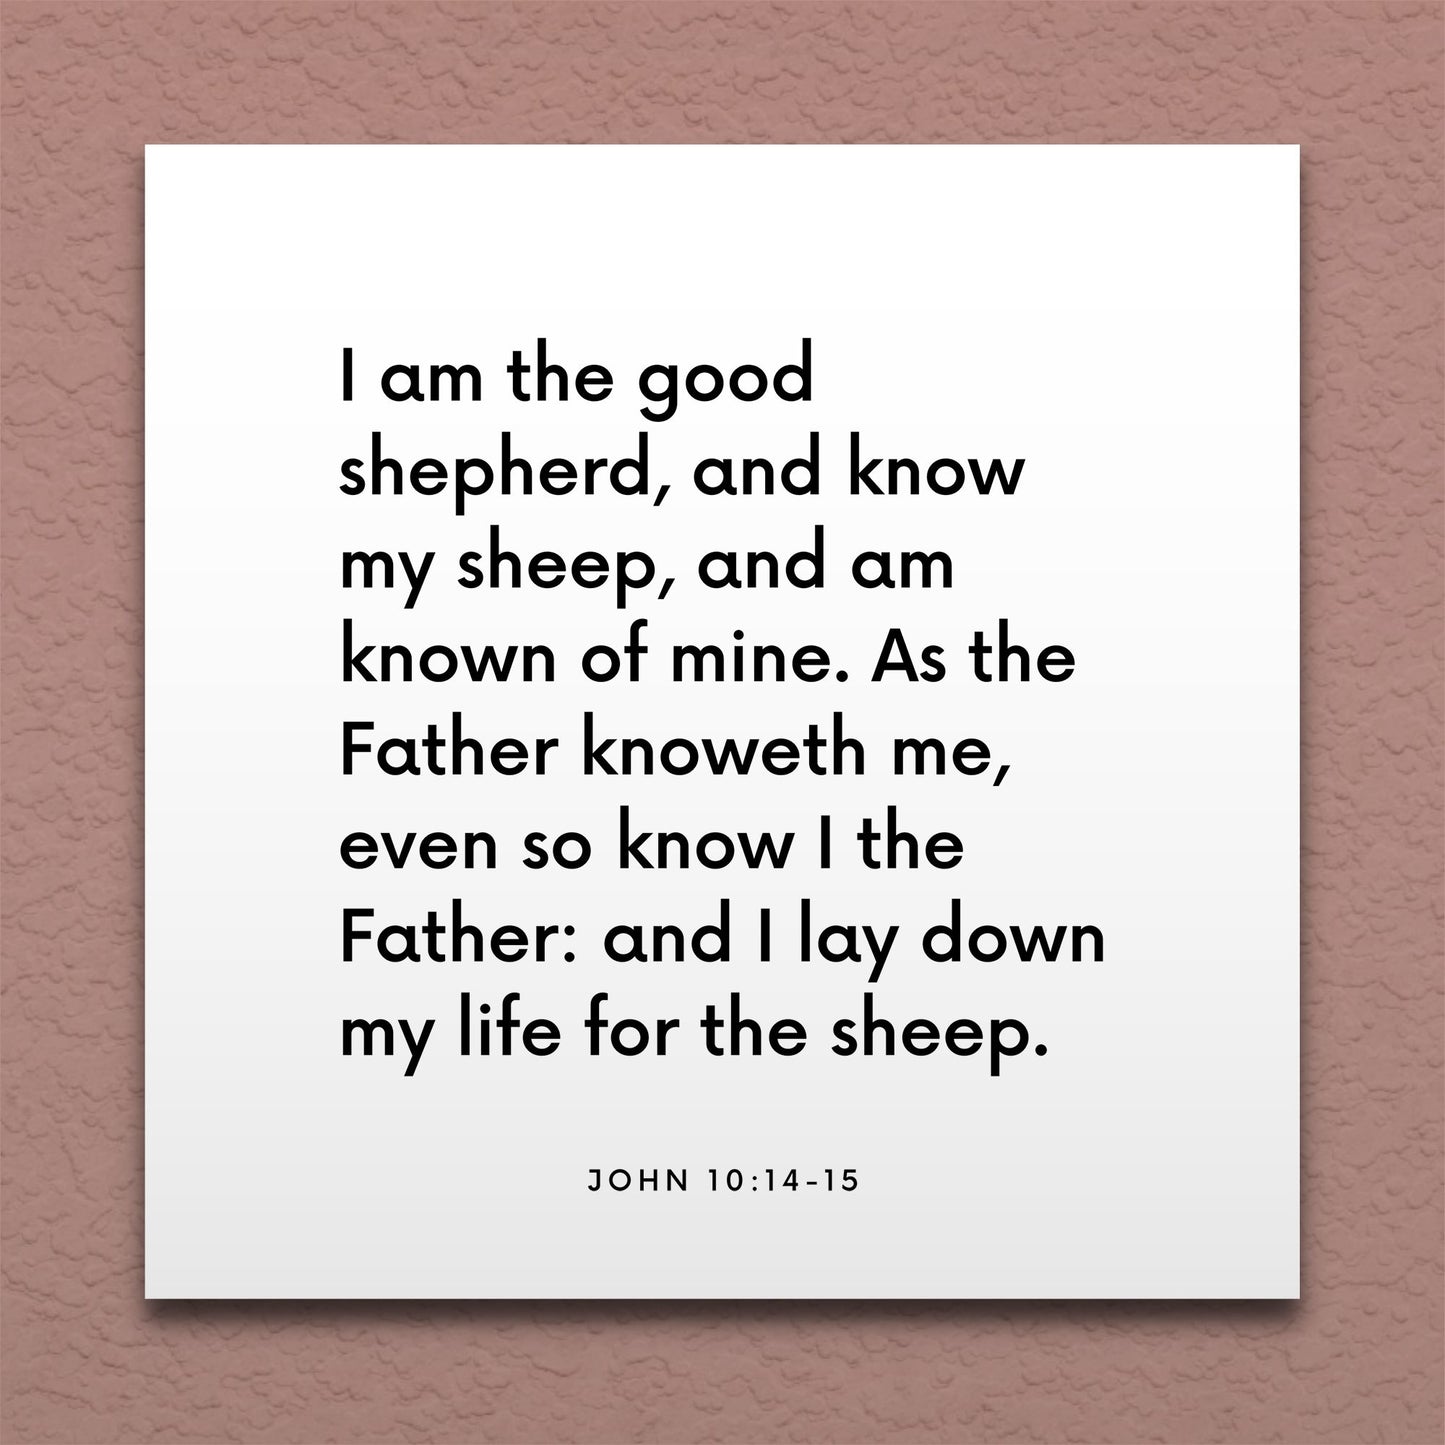 Wall-mounted scripture tile for John 10:14-15 - "I am the good shepherd, and know my sheep"